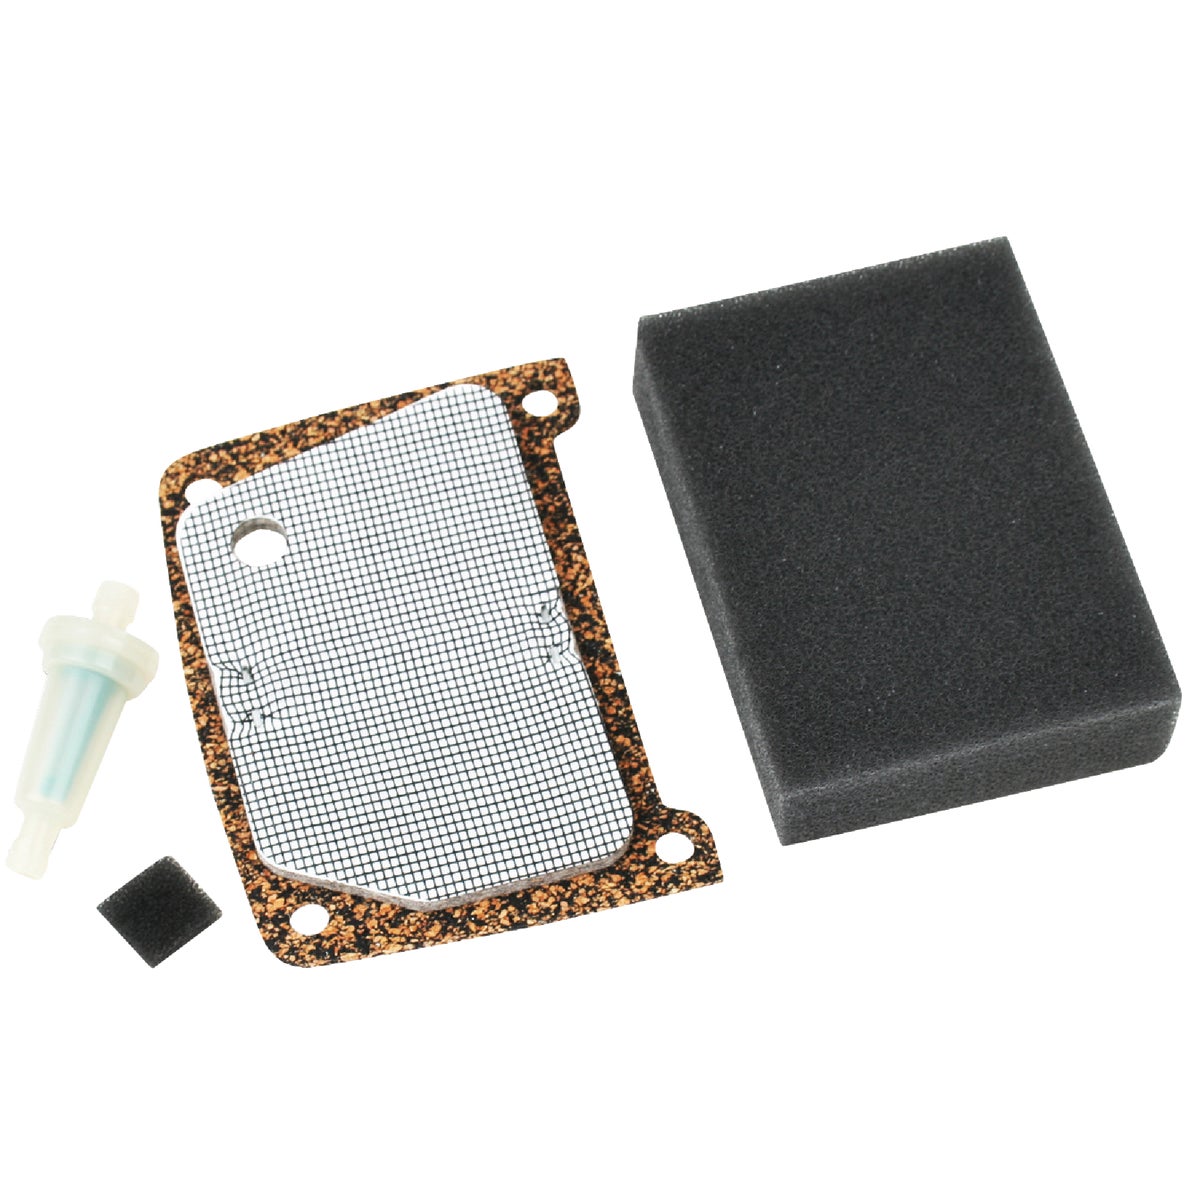 Item 402494, Replacement air filter kit for Desa heaters.